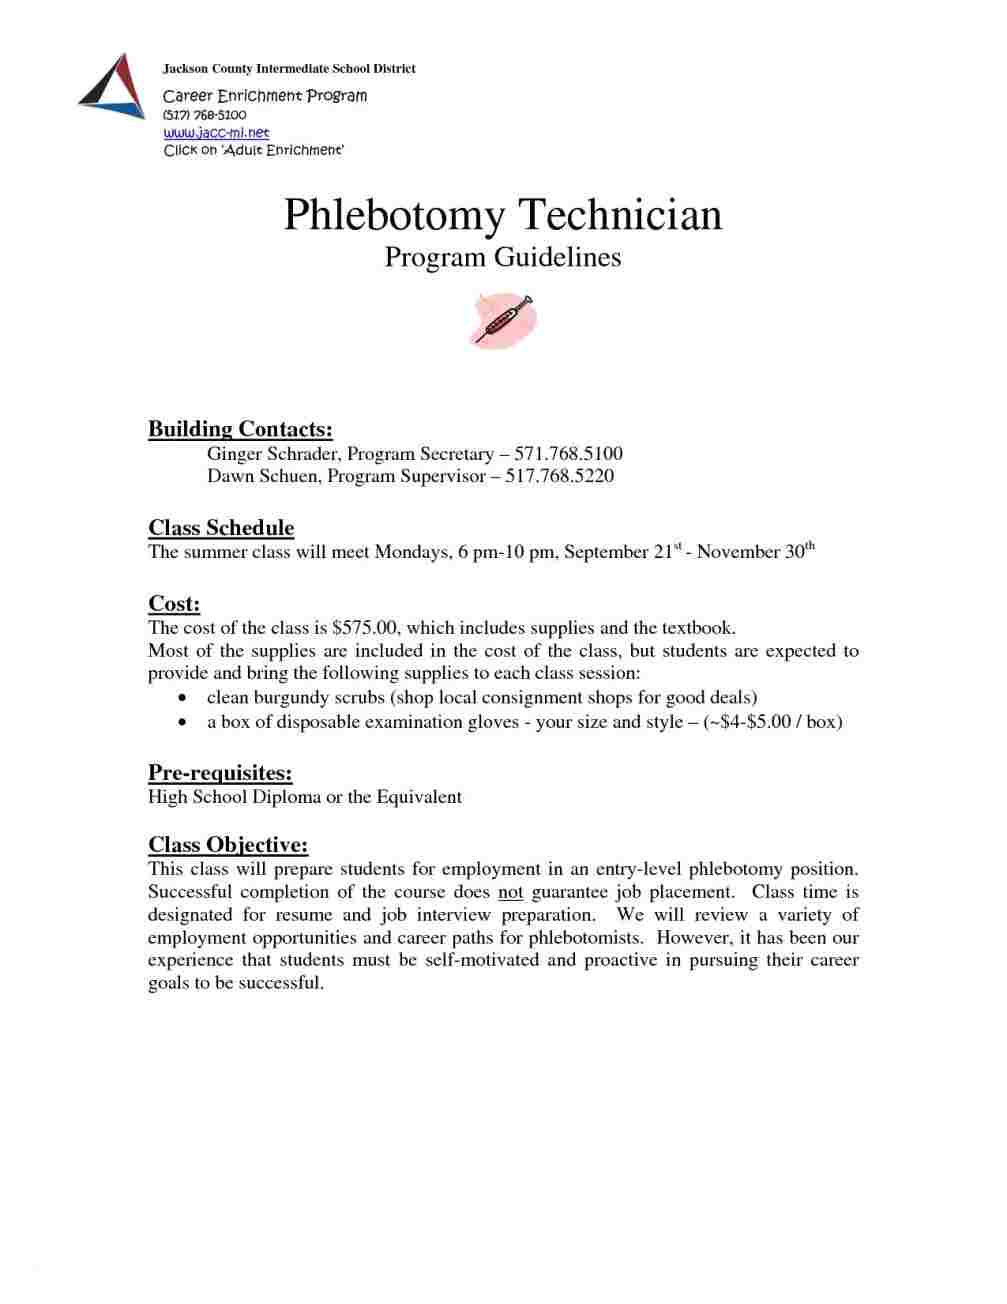 resume for phlebotomist no experience